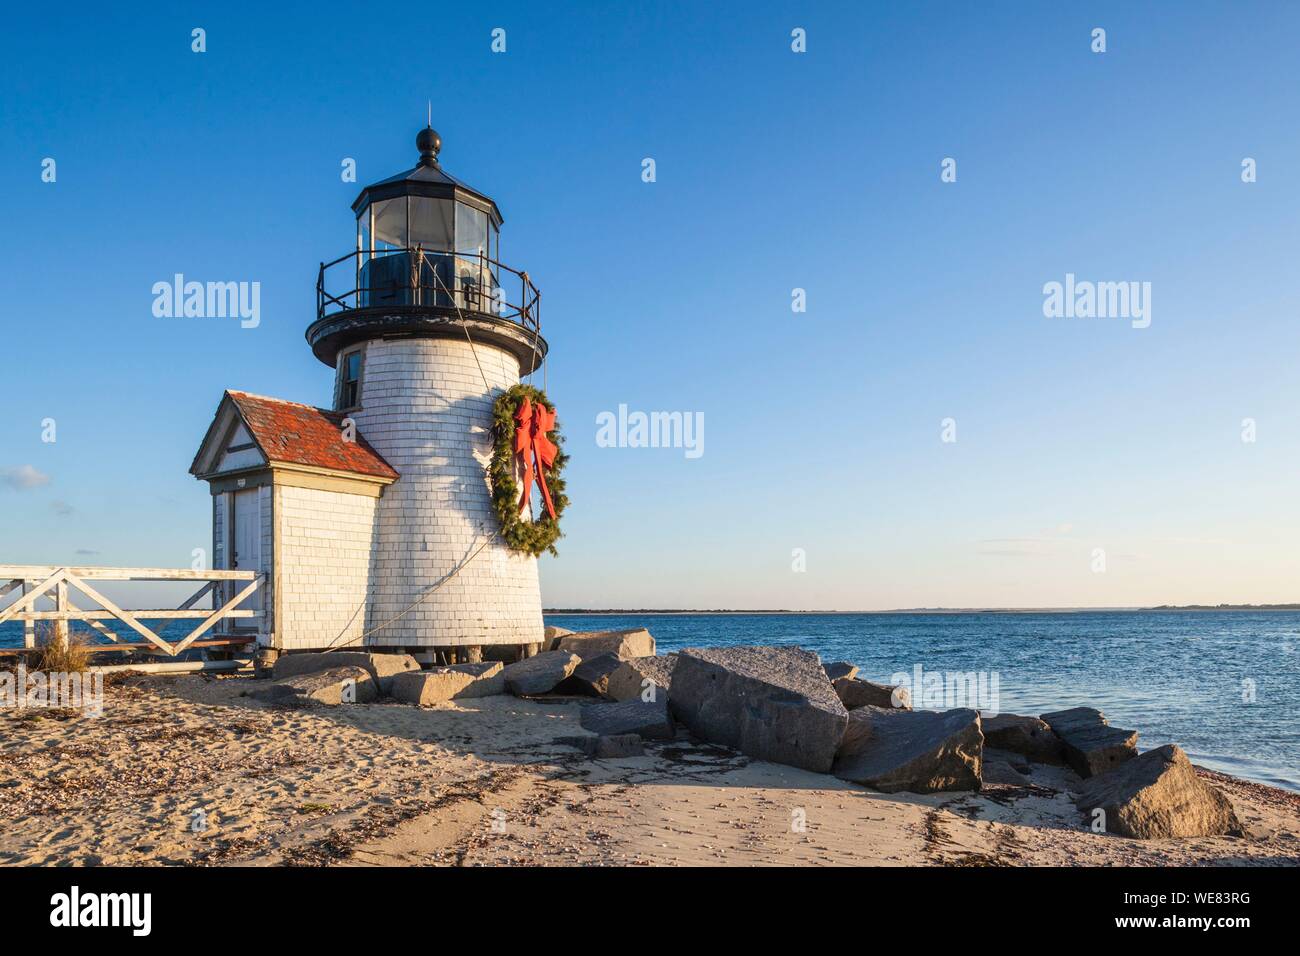 United States, New England, Massachusetts, Nantucket Island, Nantucket, Brant Point Lighthouse with a Christmas wreath Stock Photo